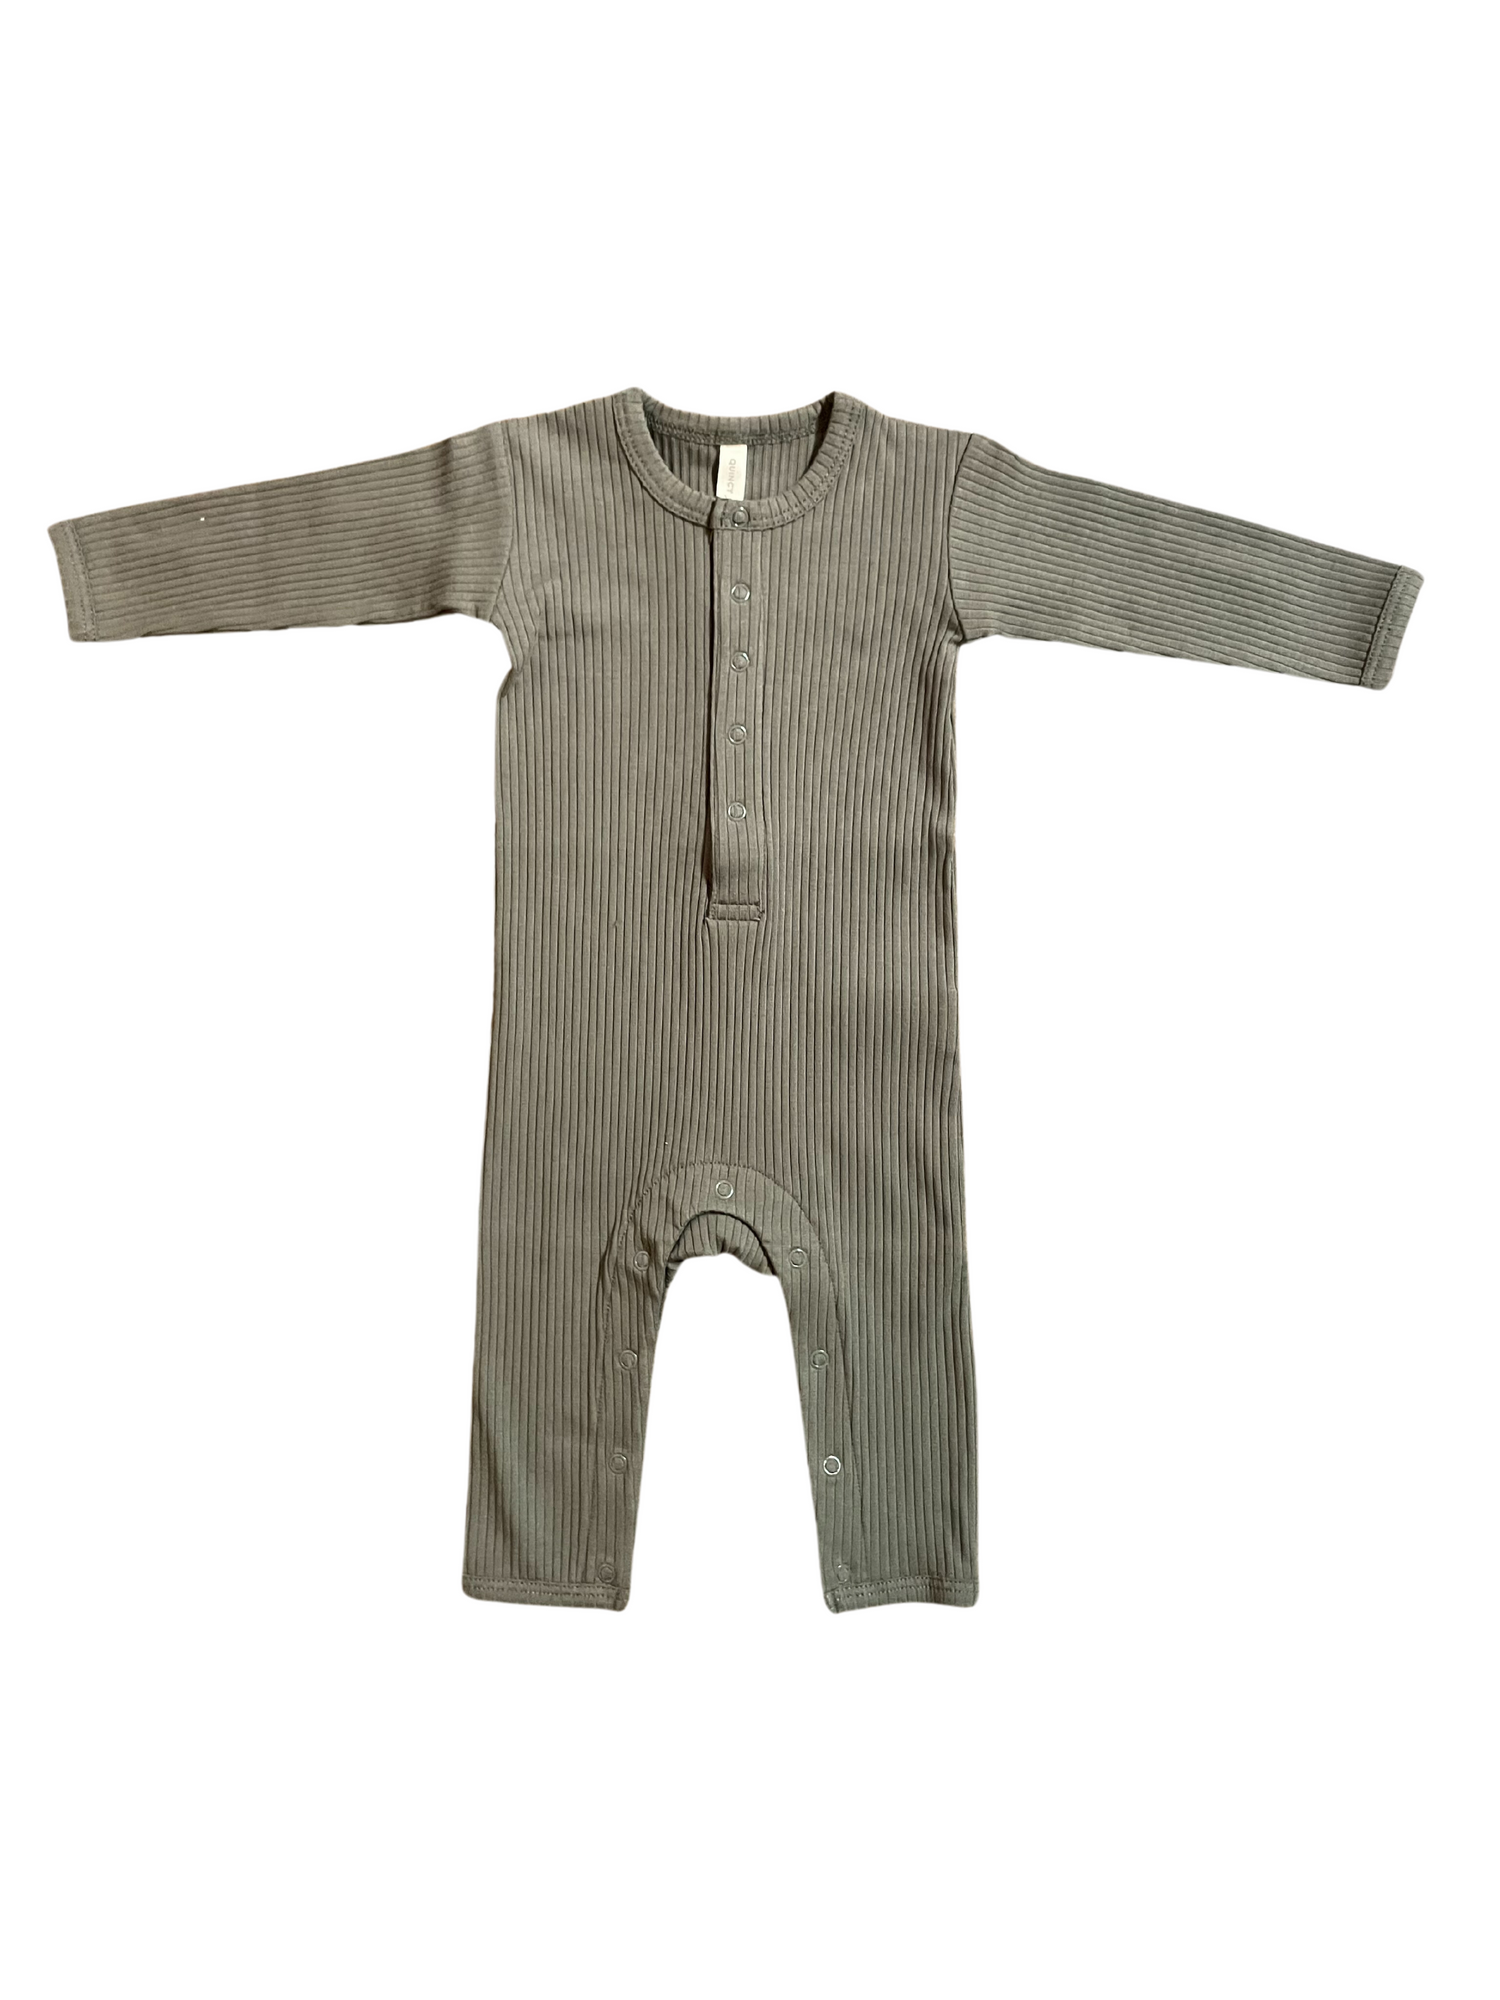 QUINCY MAE RIBBED JUMPSUIT IN FOREST - THE LITTLE EAGLE BOUTIQUE